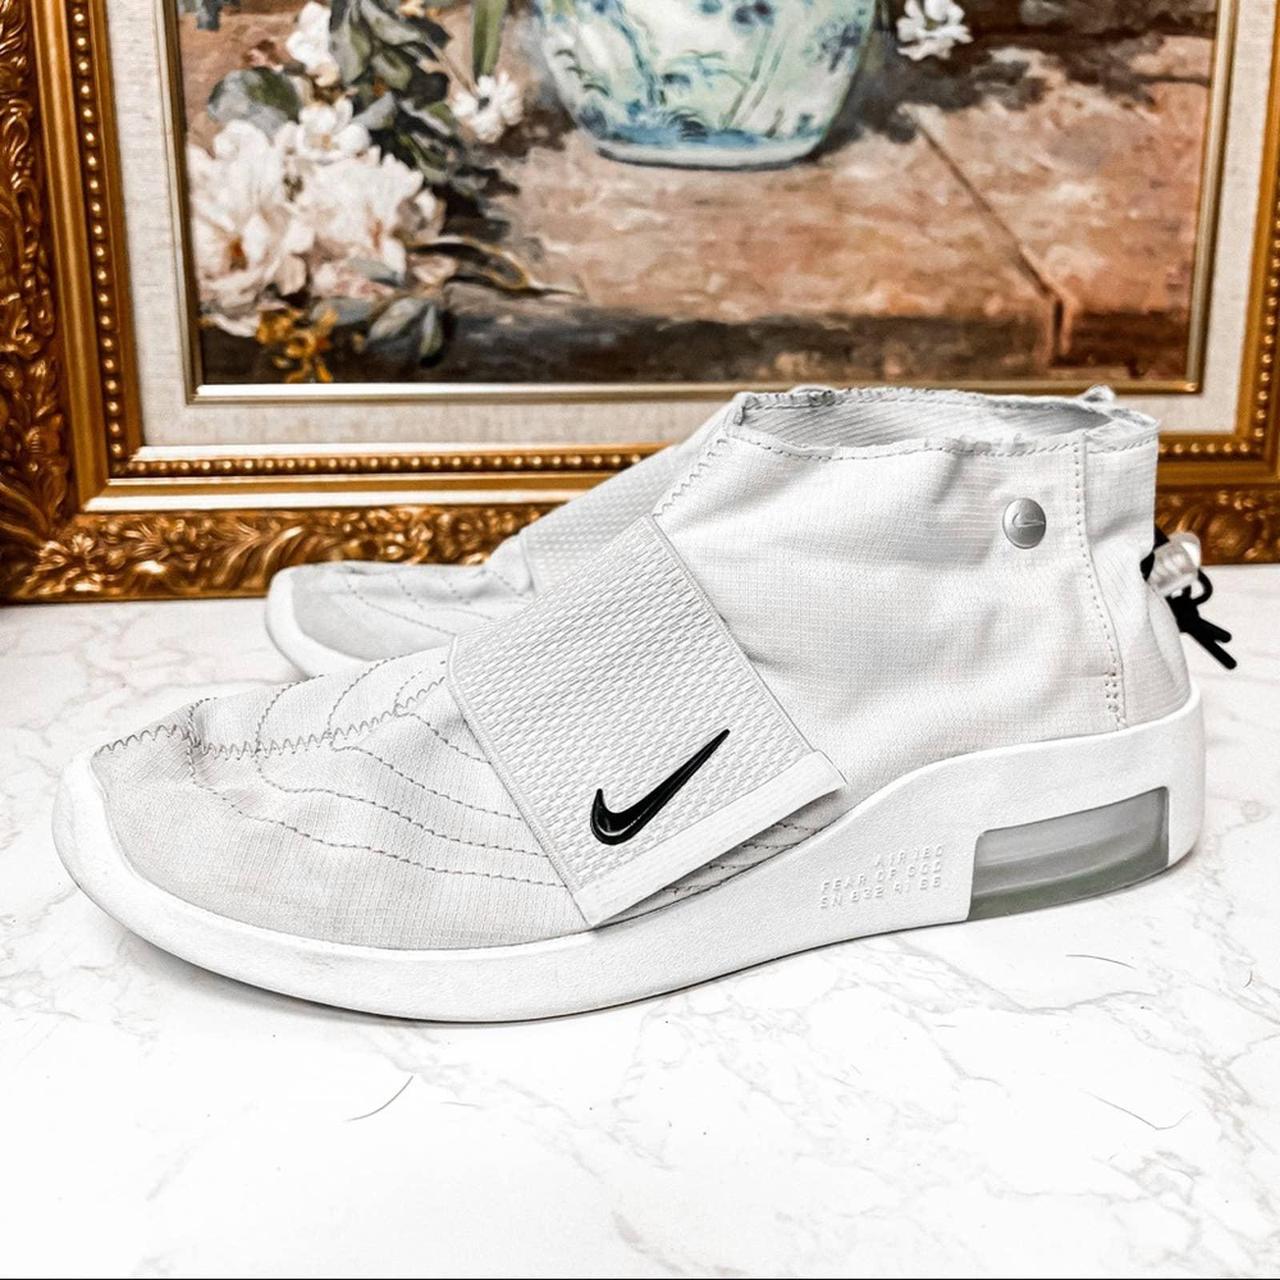 Nike Women's Silver and White Trainers